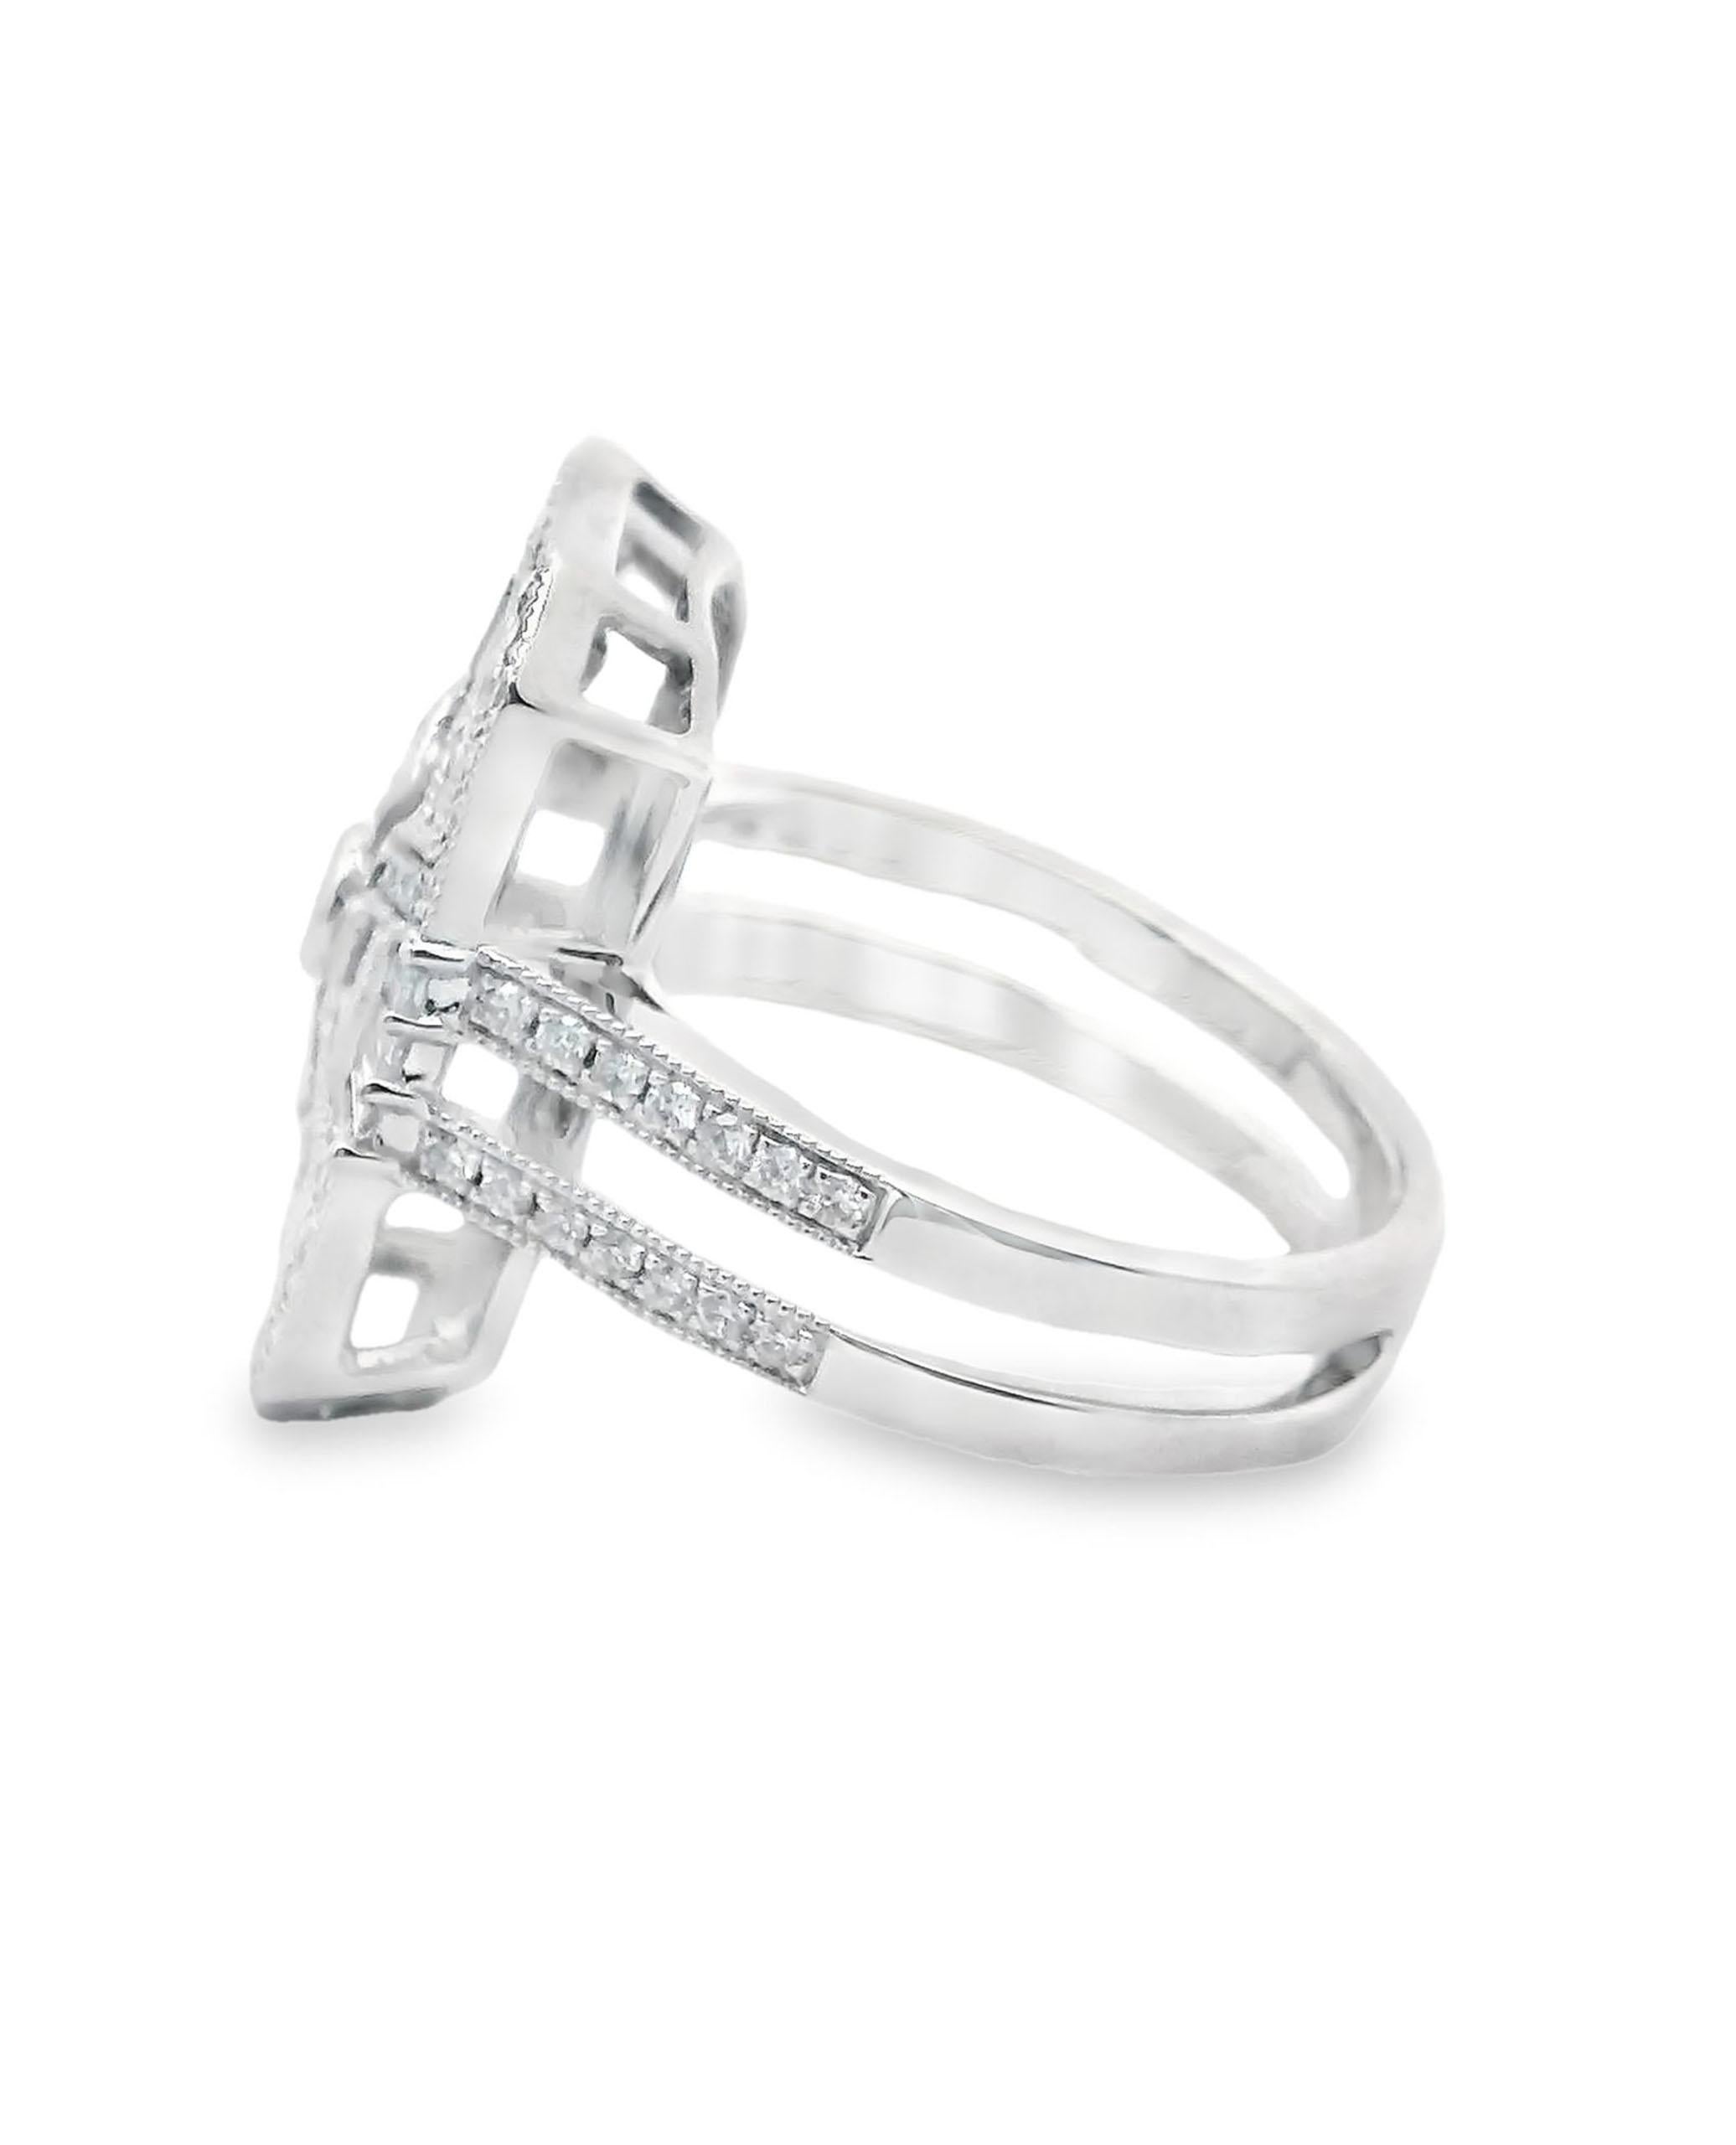 18K white gold Art Deco inspired ring with 2 princess cut diamonds weighing 0.05 carat total, 83 round brilliant-cut diamonds weighing 0.54 carat total and 14 tapered baguette diamonds weighing 0.29 carat total.

- Finger size 6.5
- Diamonds are G/H